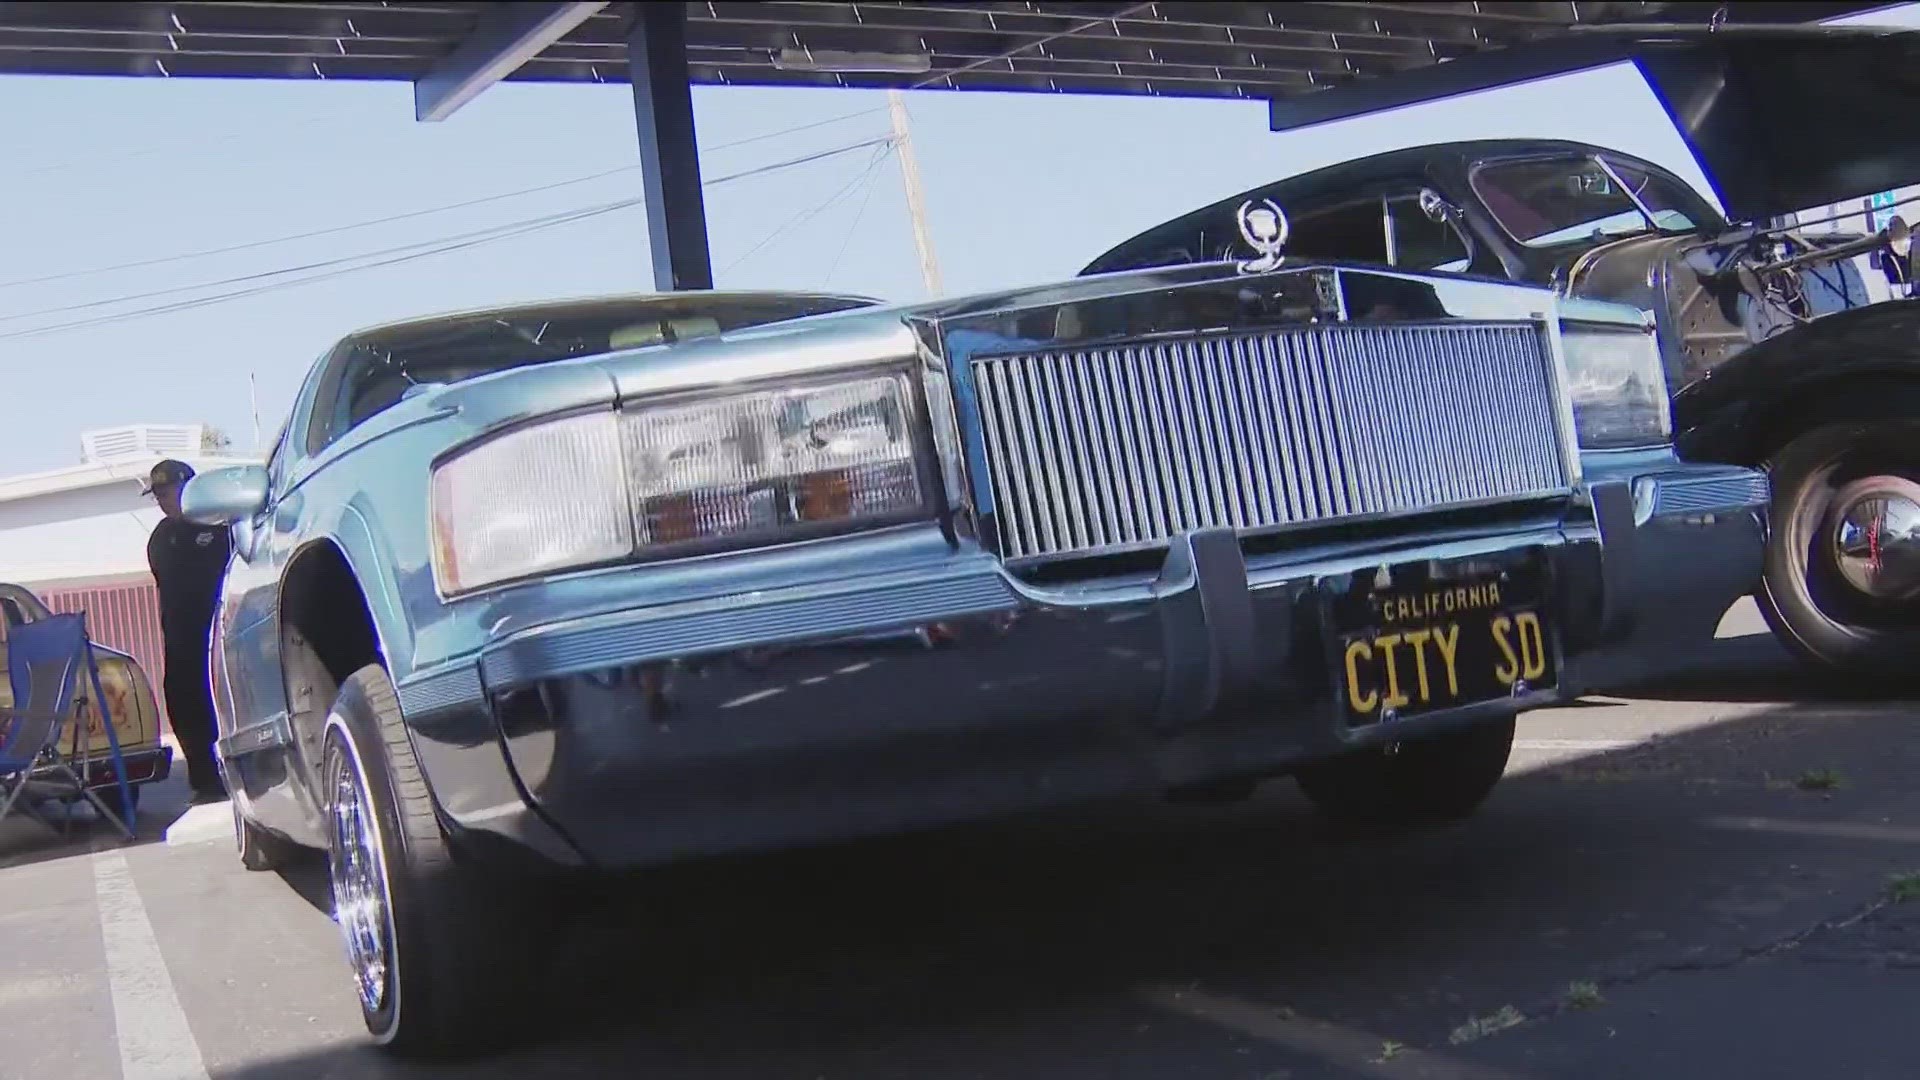 The United Lowrider Coalition celebrates the end of a decades-old ban on cruising in National City as the last "No cruising zone" is taken down.